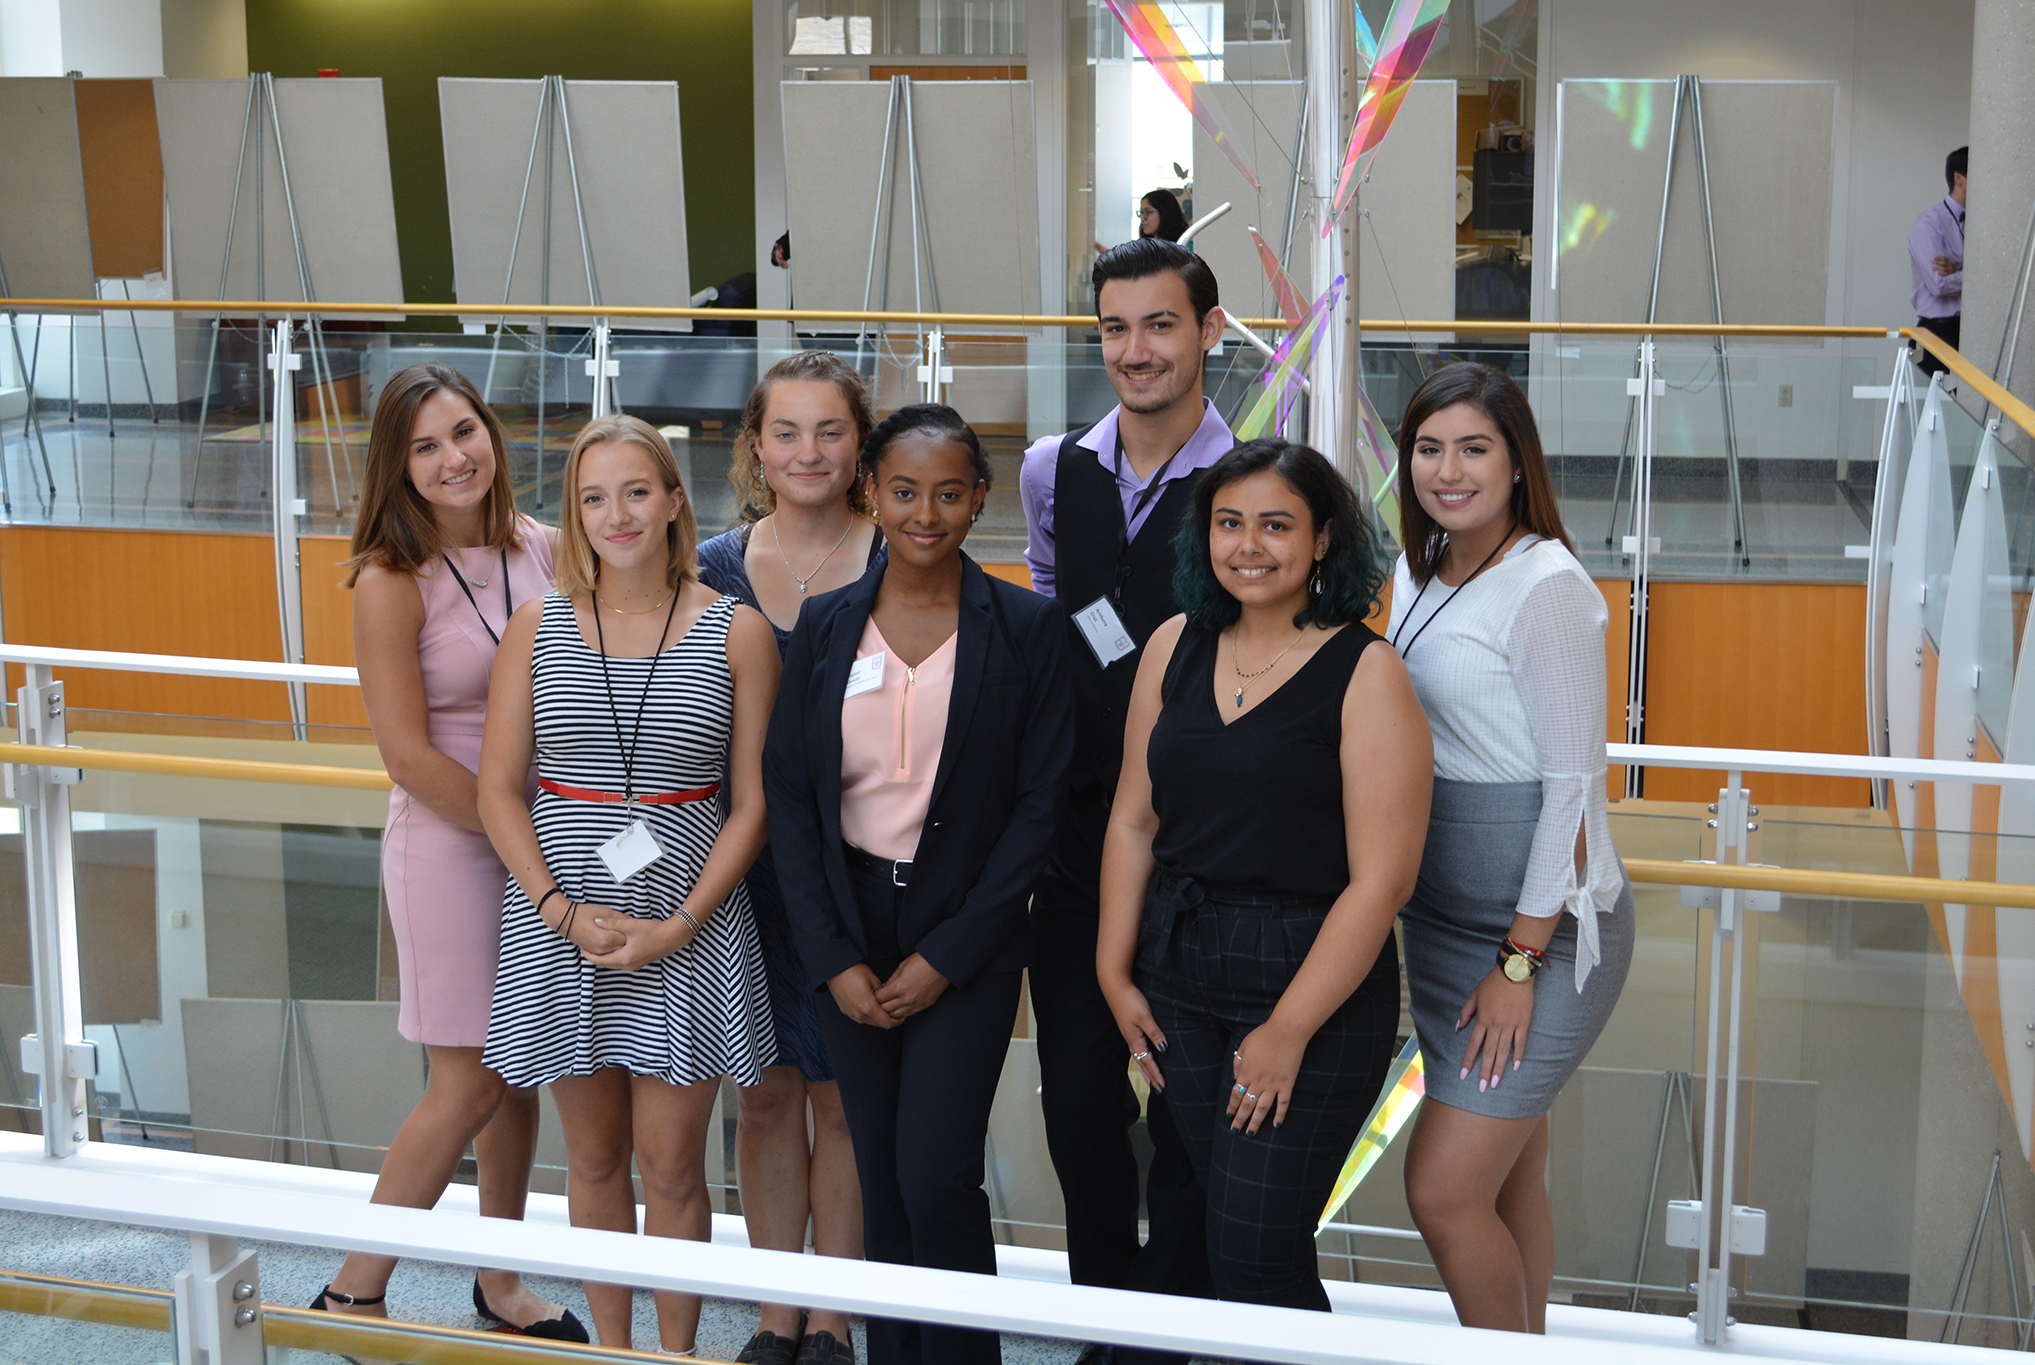 Callie Vitro, Elsa Rodriguez, Madeline Conway, Carington McGowan, Anthony Cruz, Kayla Osman, and Maria Zapata take a break during the Summer MU Undergraduate Research and Creative Achievements Forum at the Bond Life Sciences Center. As part of the MU-ARTSS program, each student created a poster to present at the forum.